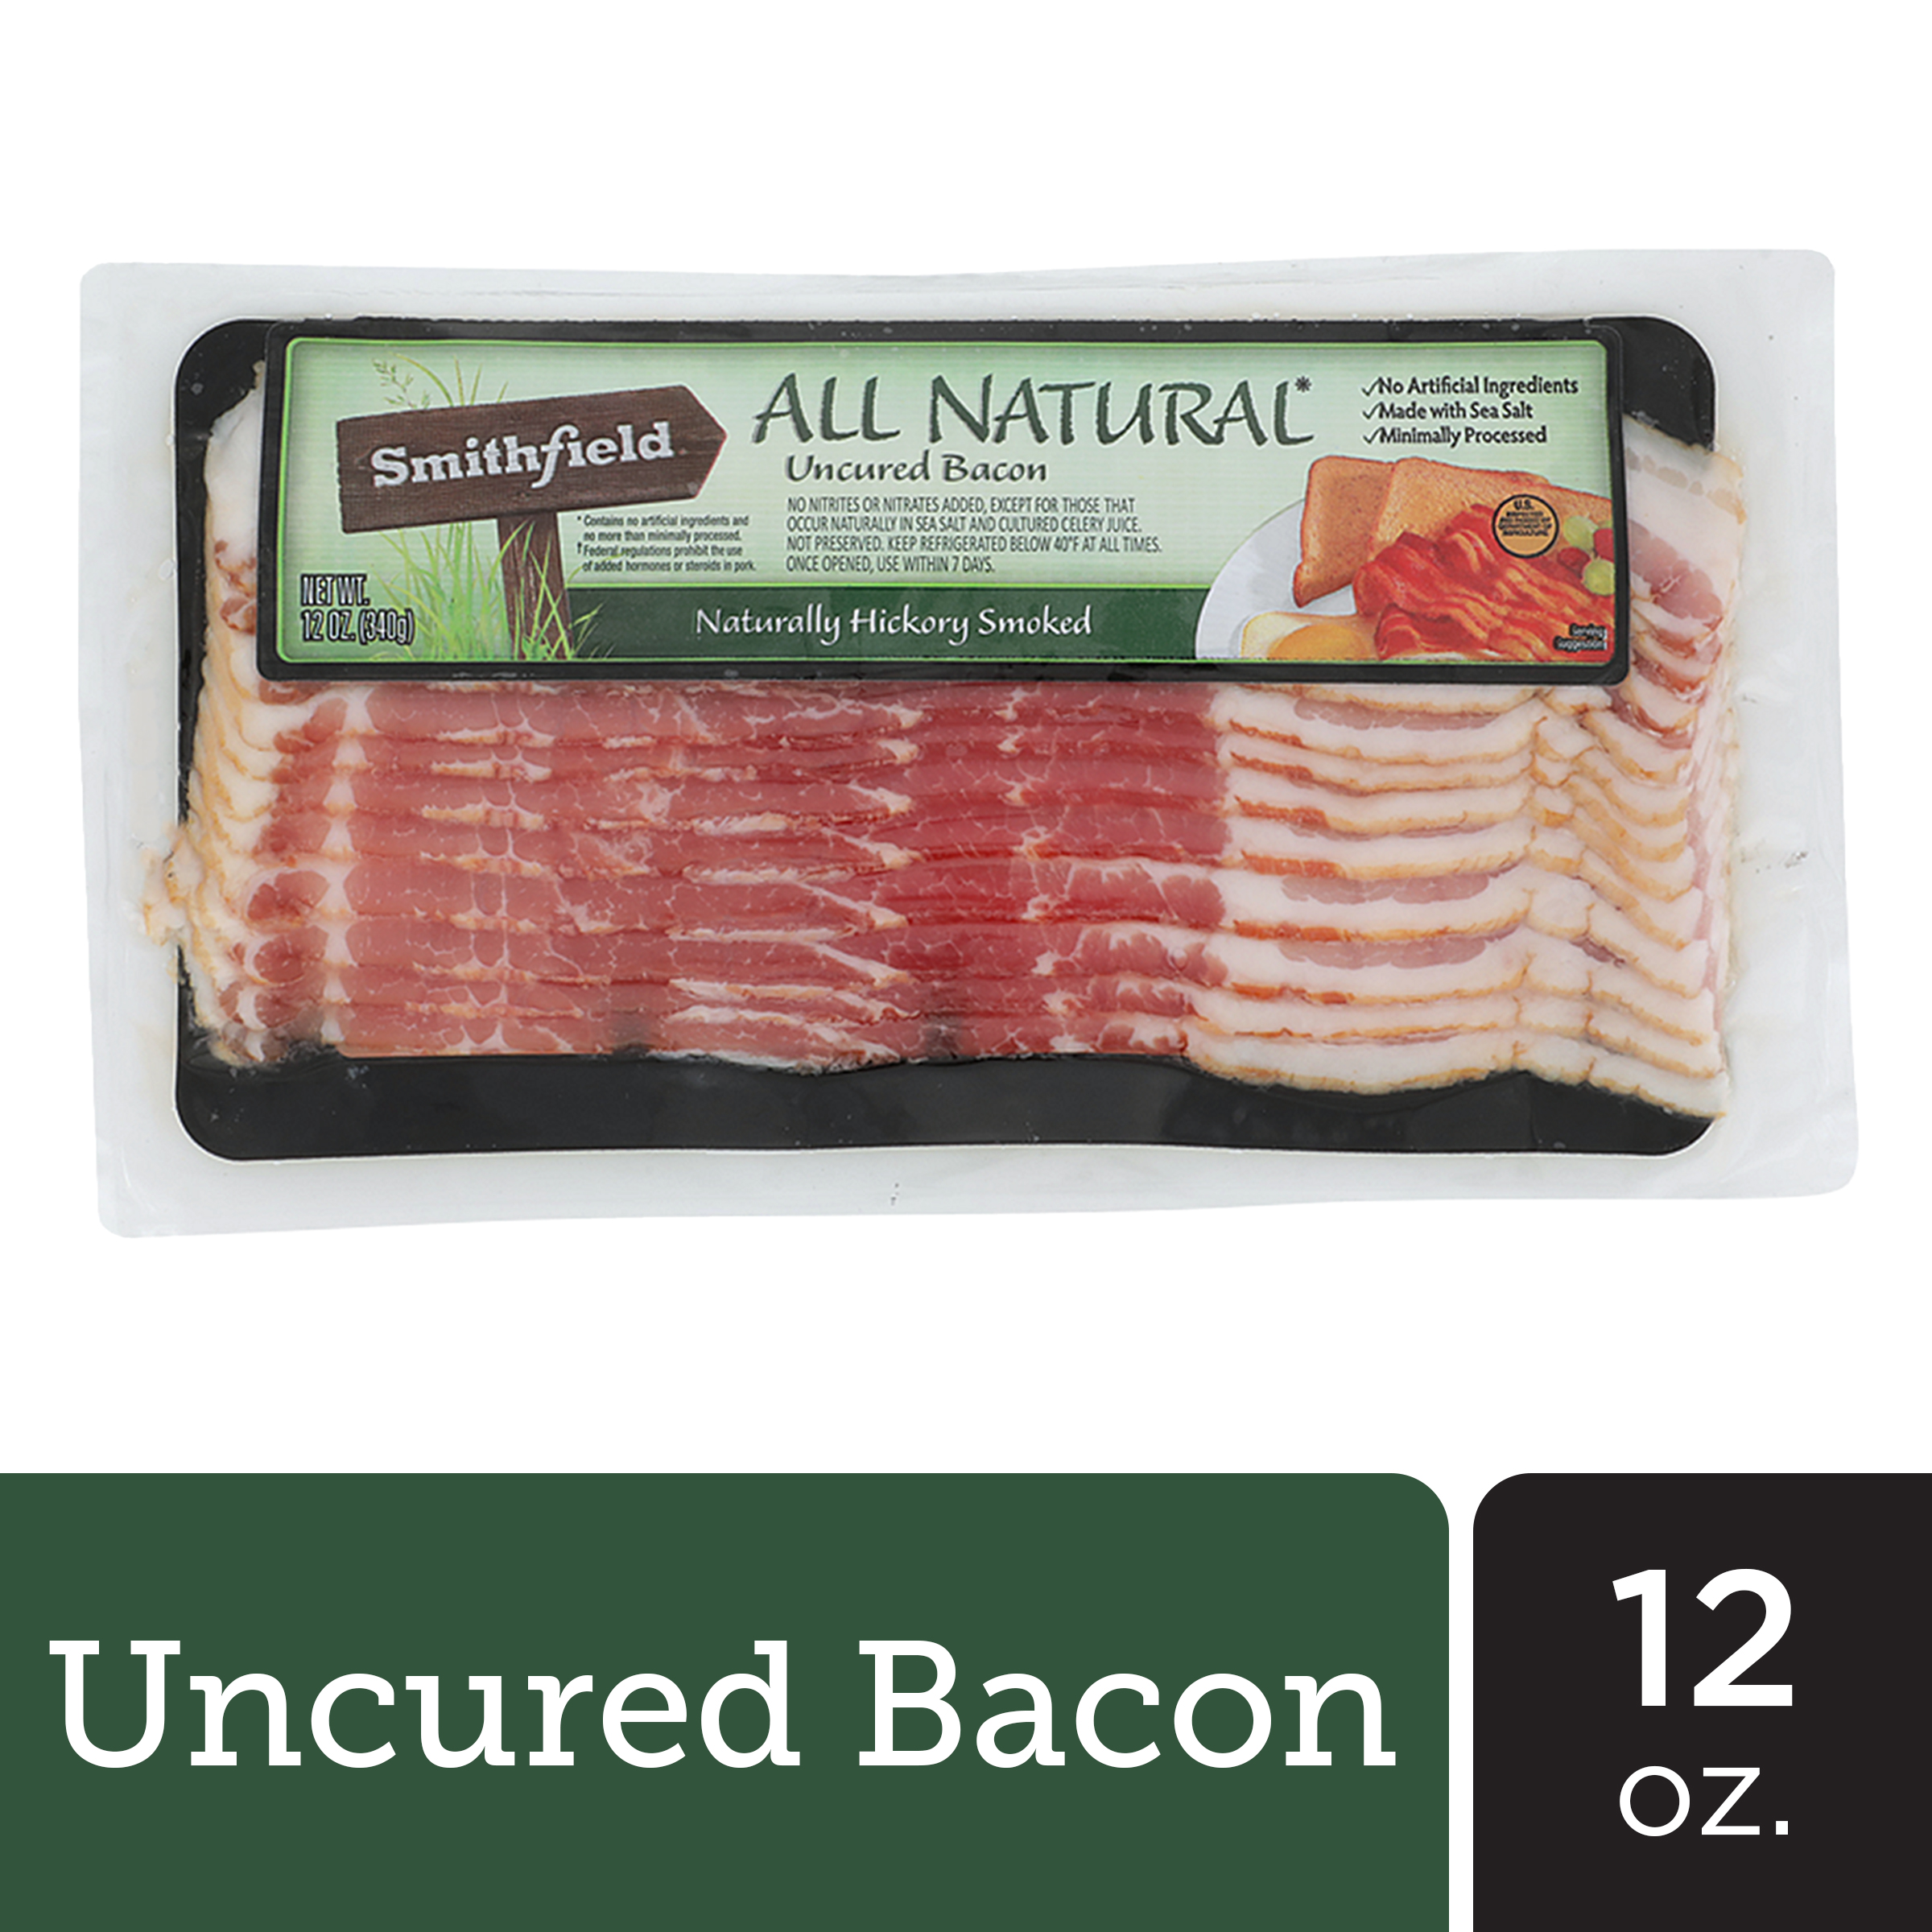 Smithfield All Natural Uncured Hickory Smoked Bacon, 12 oz - image 1 of 9